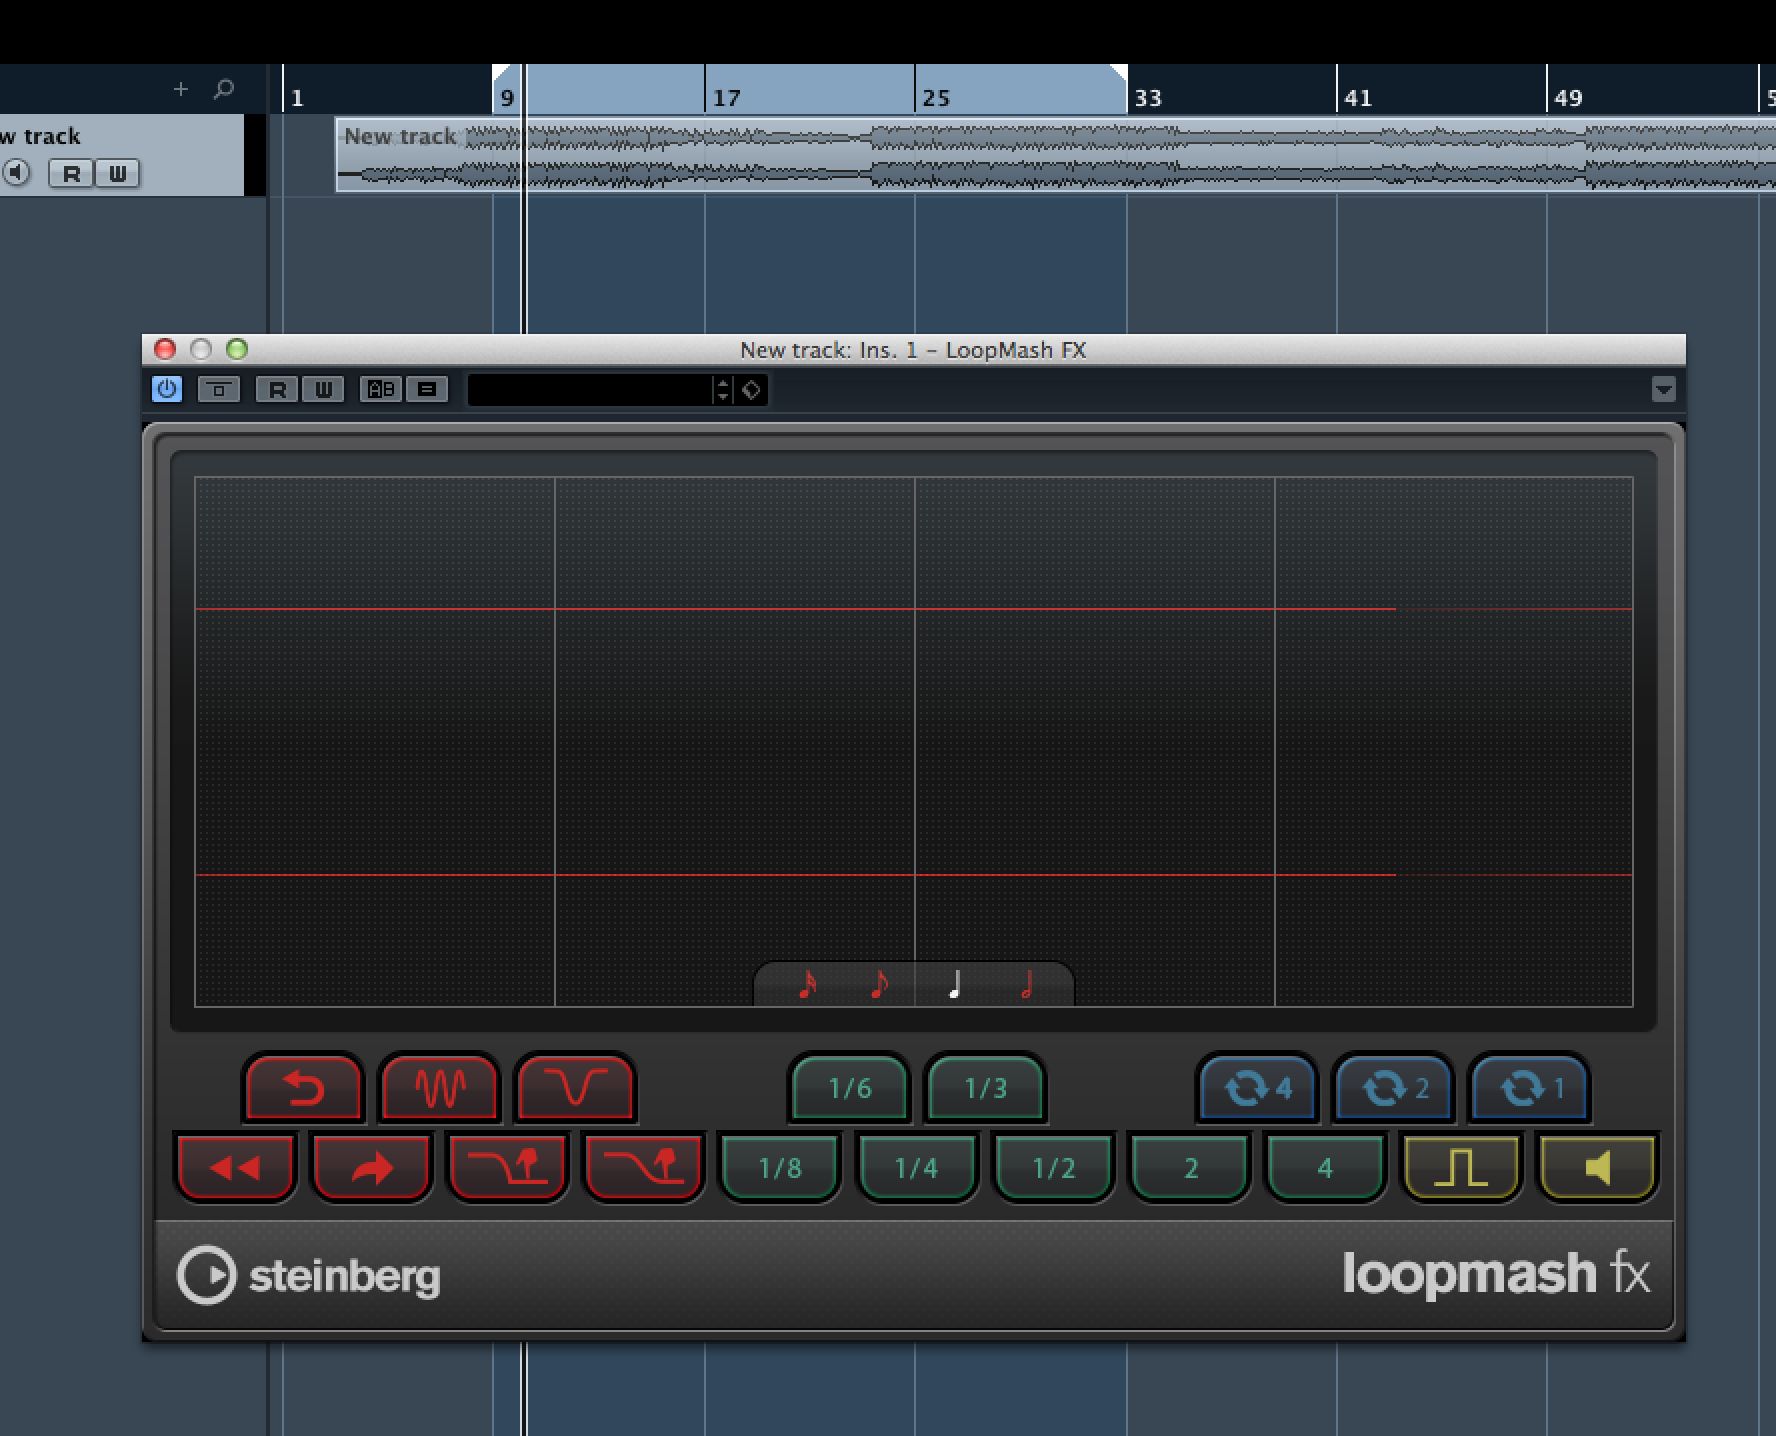 The Loopmash FX plug-in is loaded and ready to chop your audio!